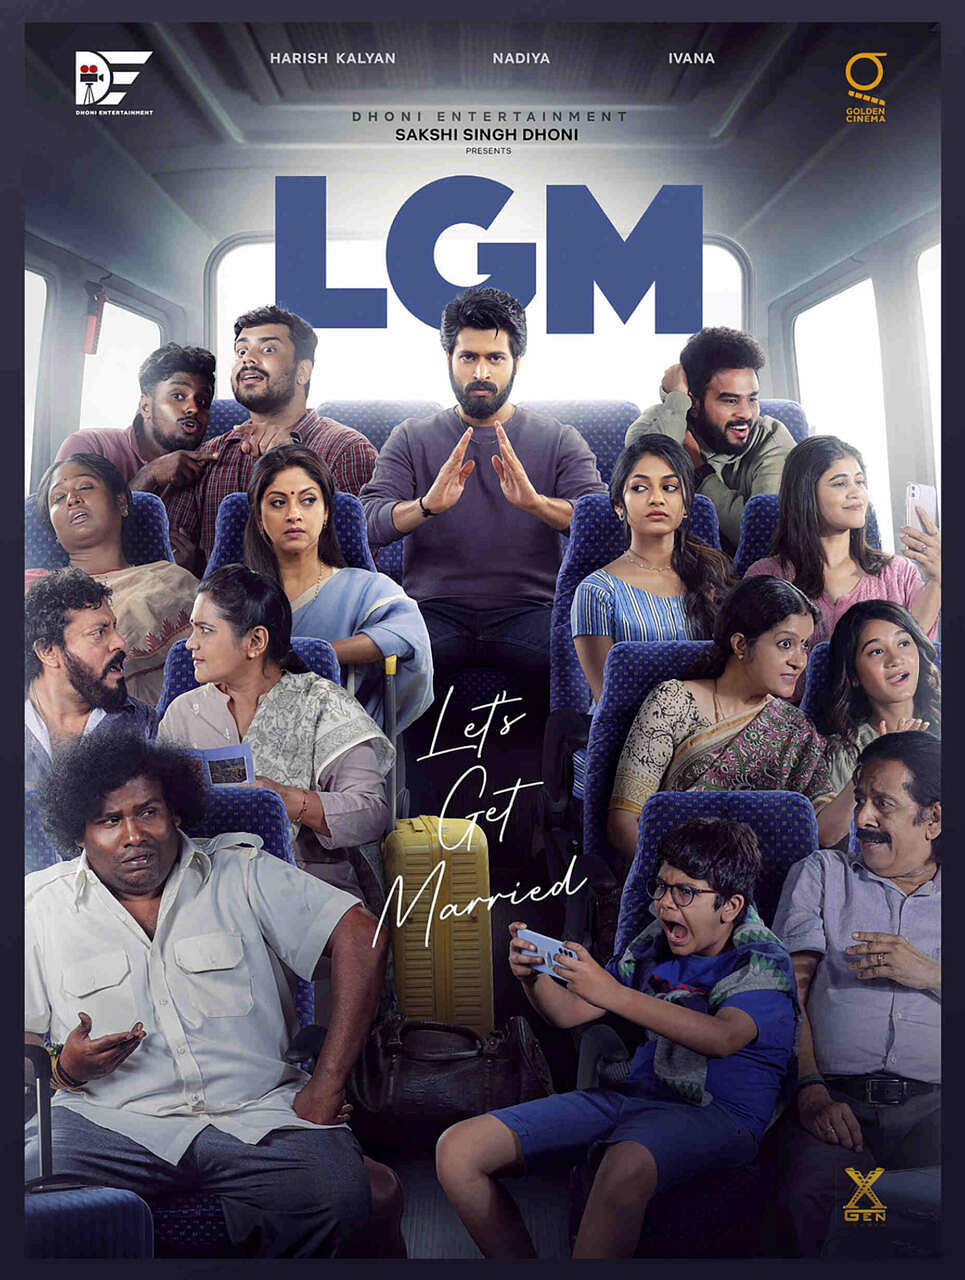 Starring Harish Kalyan, Ivana, and Nadhiya, 'Let's Get Married' backed by MS Dhoni hit the theatres on 28 July.